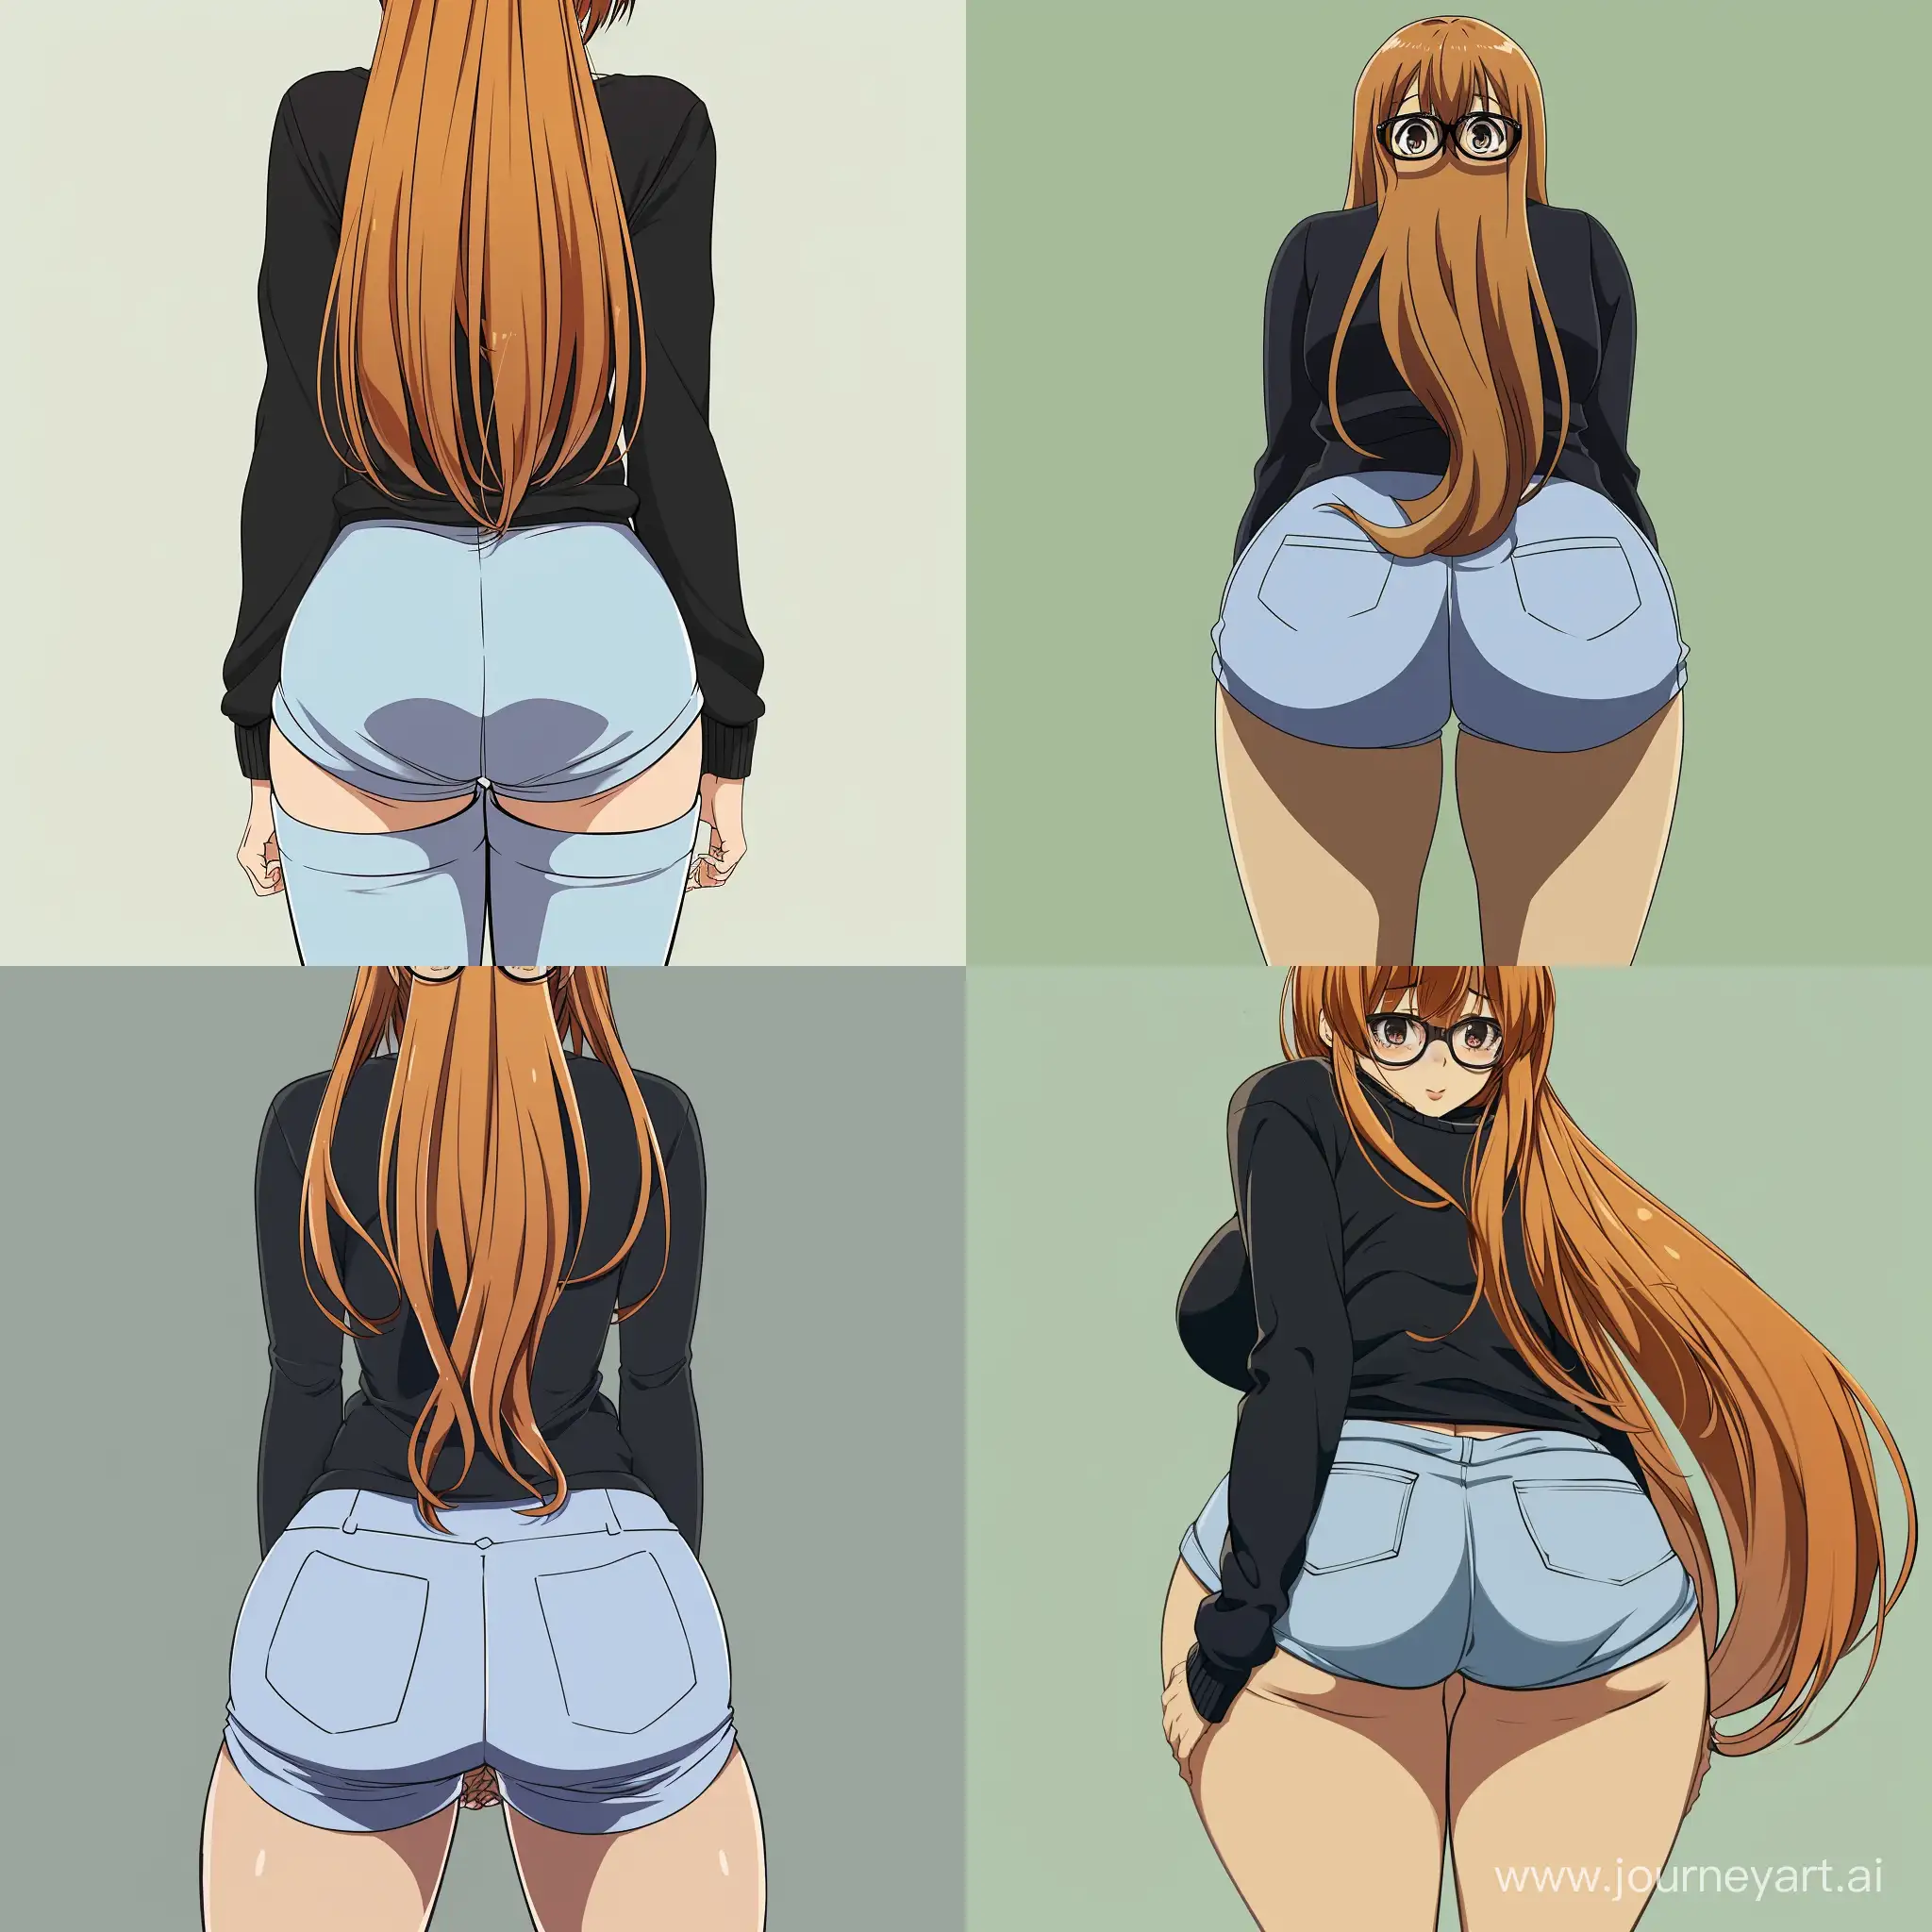 Anime-Woman-with-Glasses-and-Massive-Thighs-in-Long-Sleeve-Shirt-and-Blue-Pants